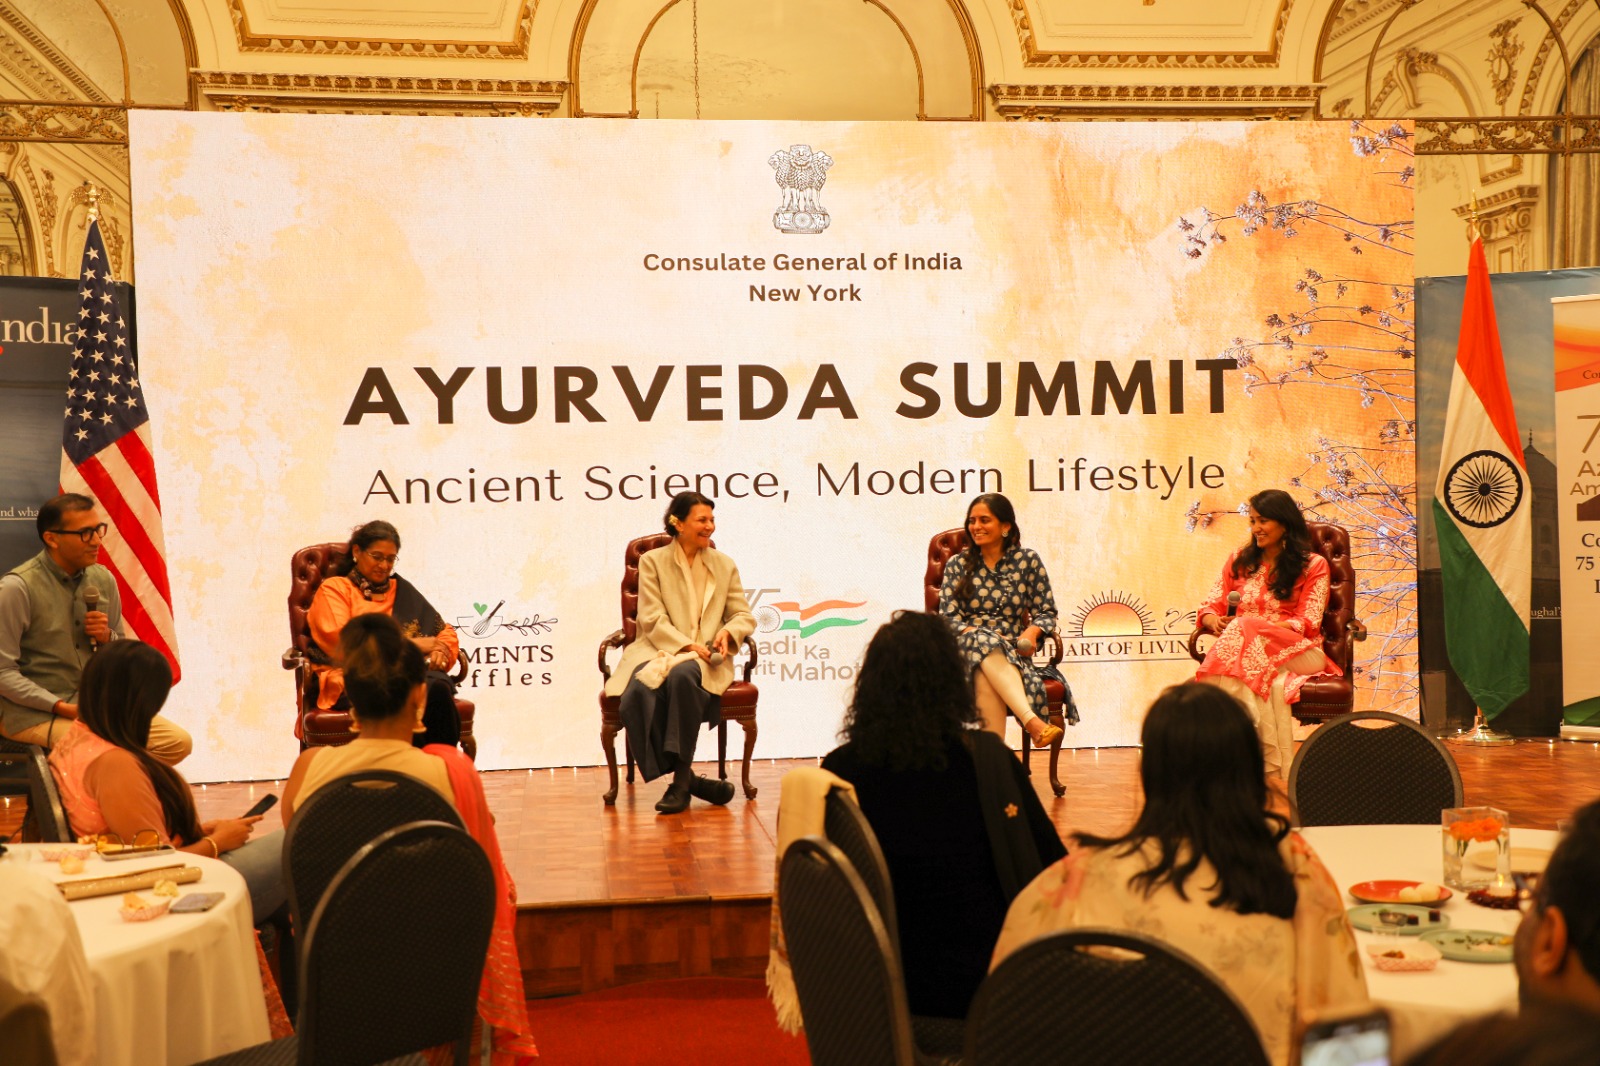  Ayurveda Day Celebrations held at Indian Consulate in New York